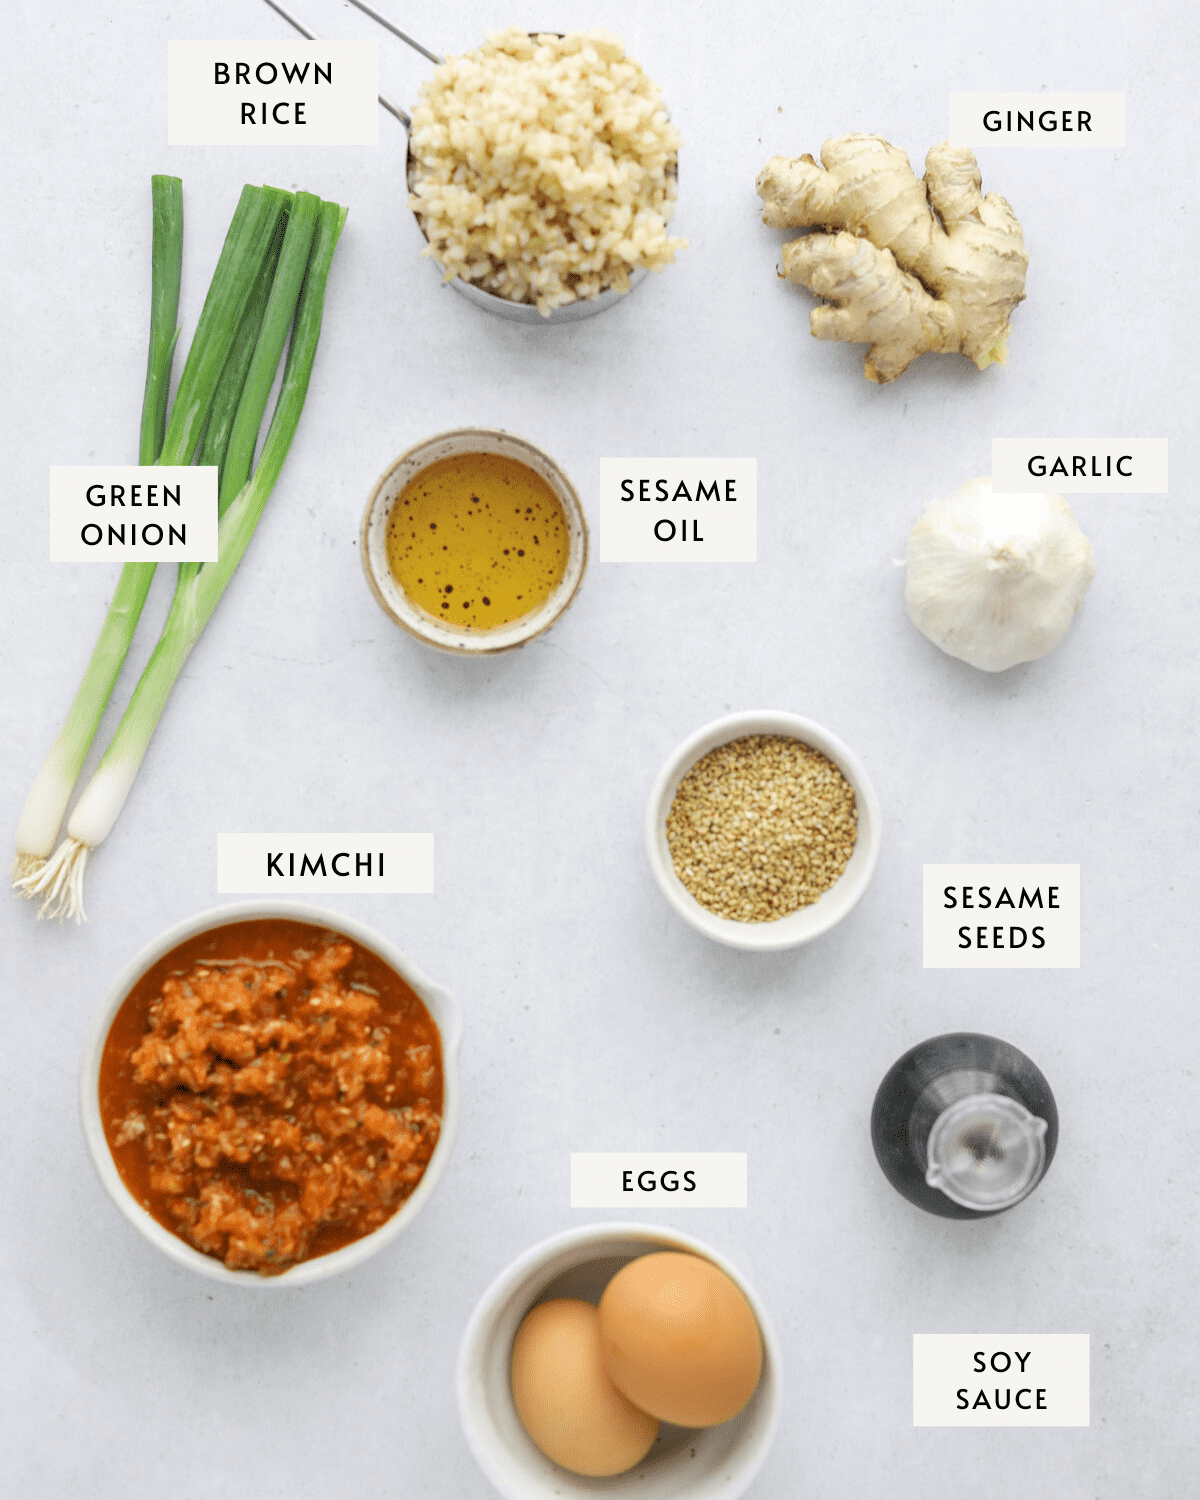 Ingredients for fried rice individually portioned and labeled: a bowl of rice, green onions, a knob of ginger, a head of garlic, soy sauce and kimchi